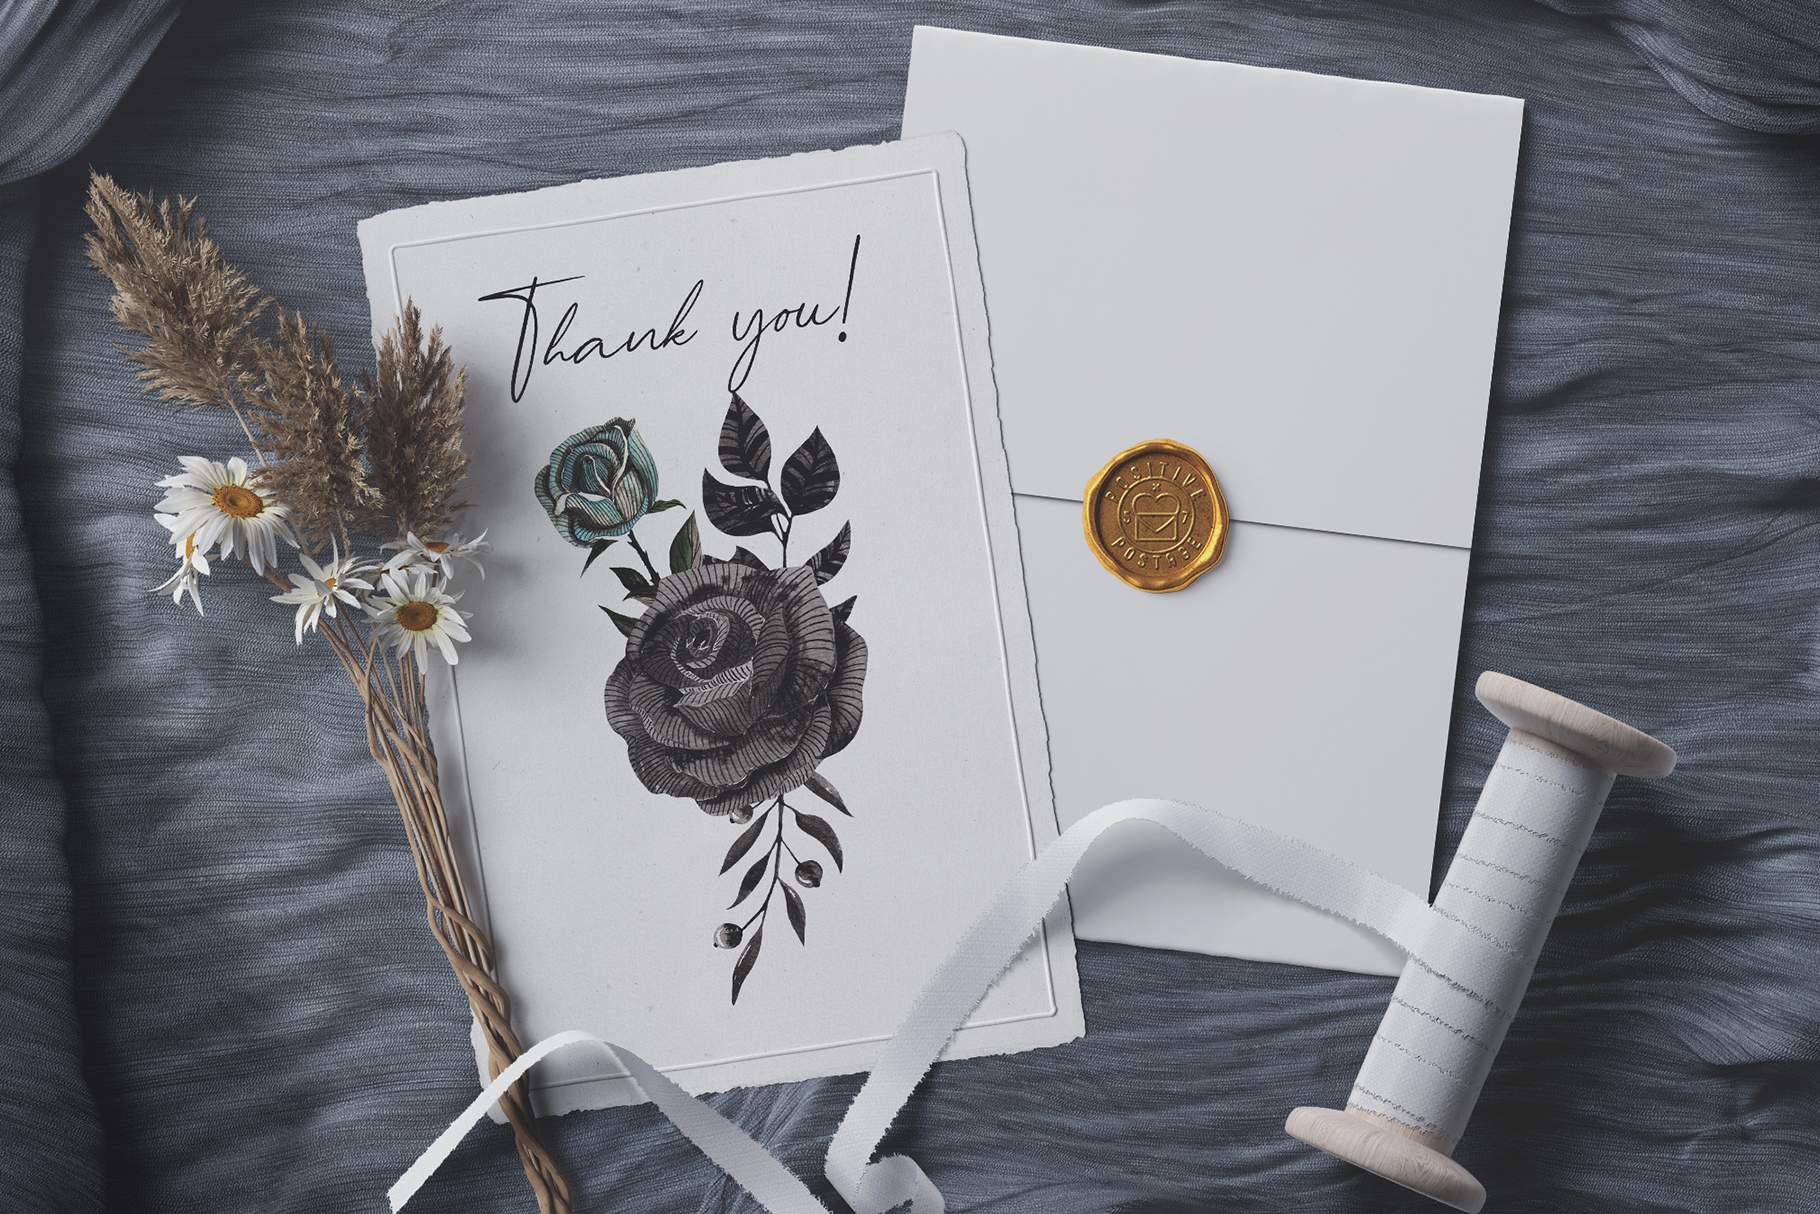 Thank you card with a flower and a spool of thread.